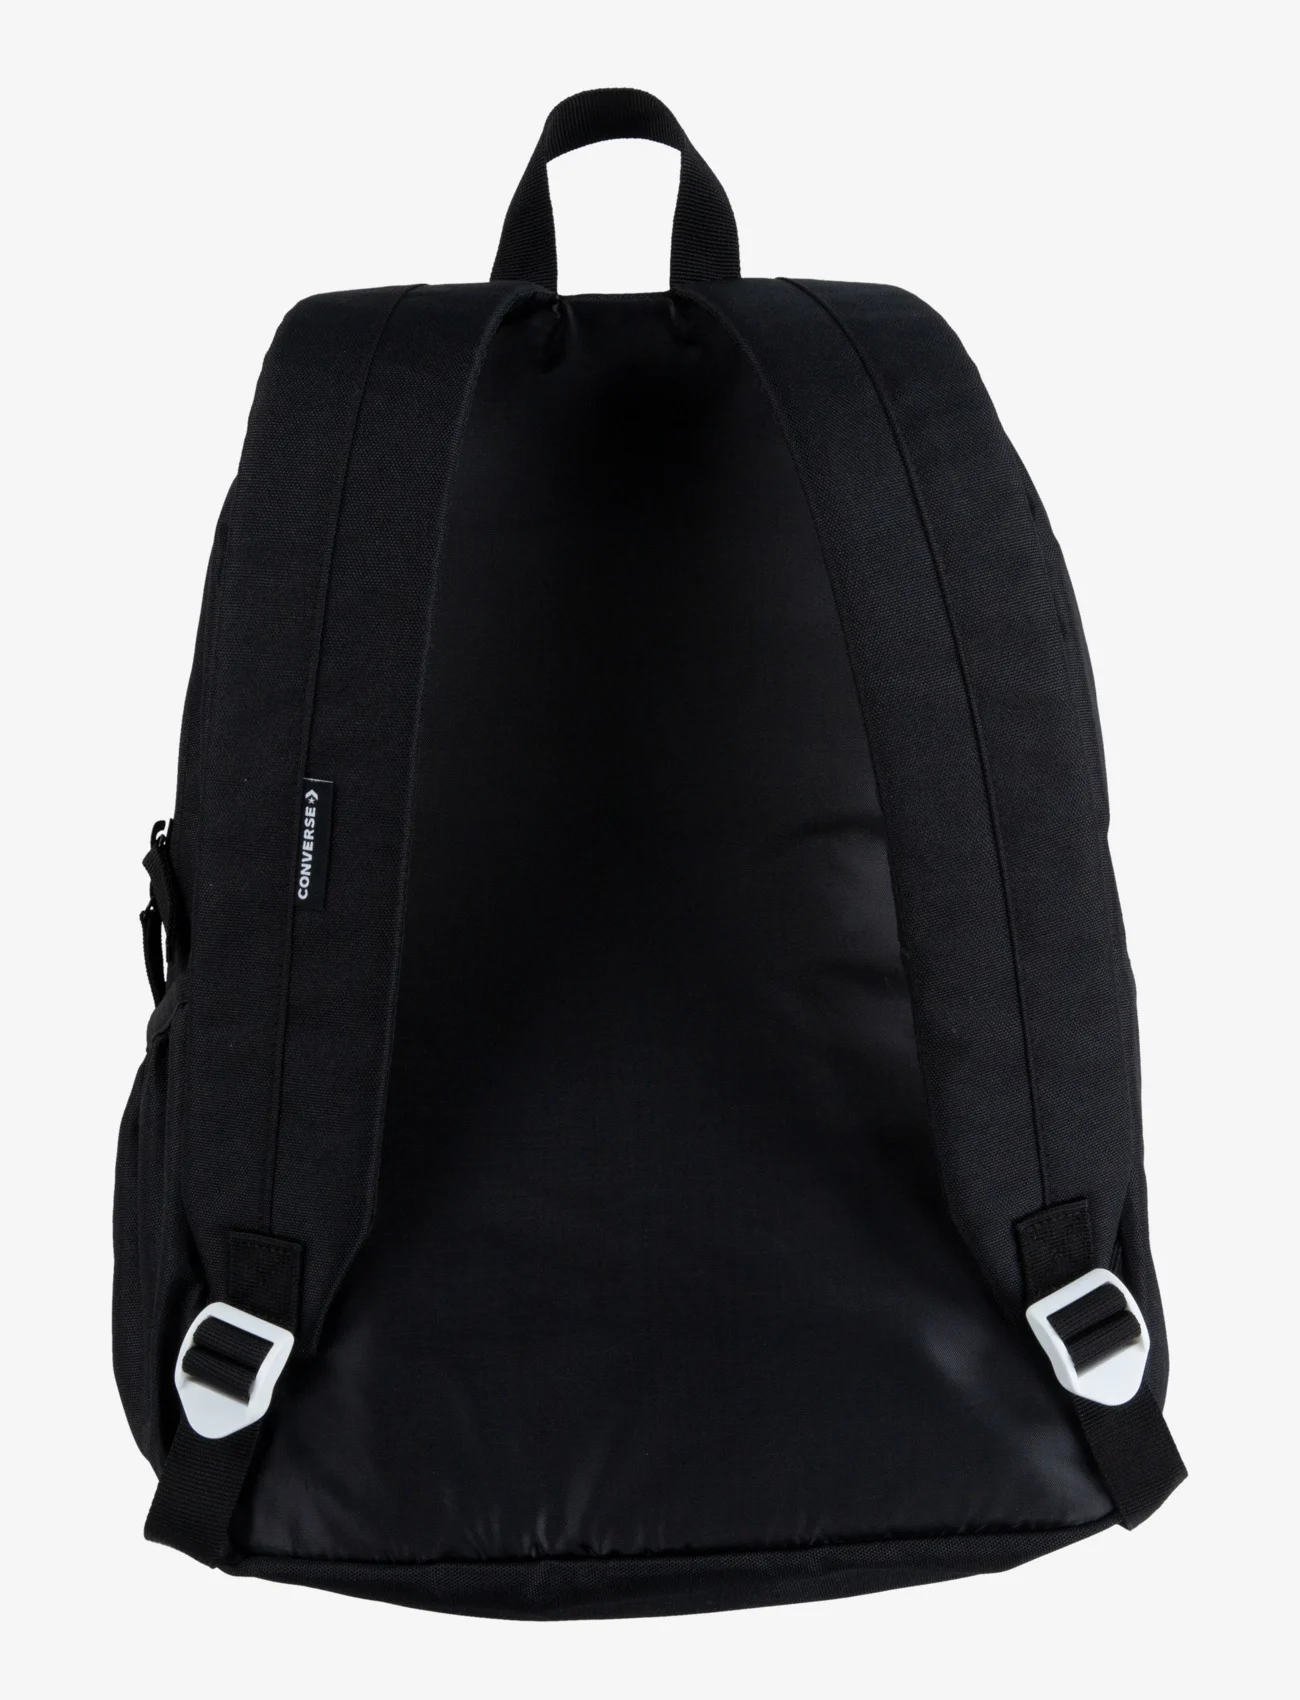 Converse - CAN CHUCK PATCH BACKPACK / CAN CHUCK PATCH BACKPACK - sommerschnäppchen - black - 1